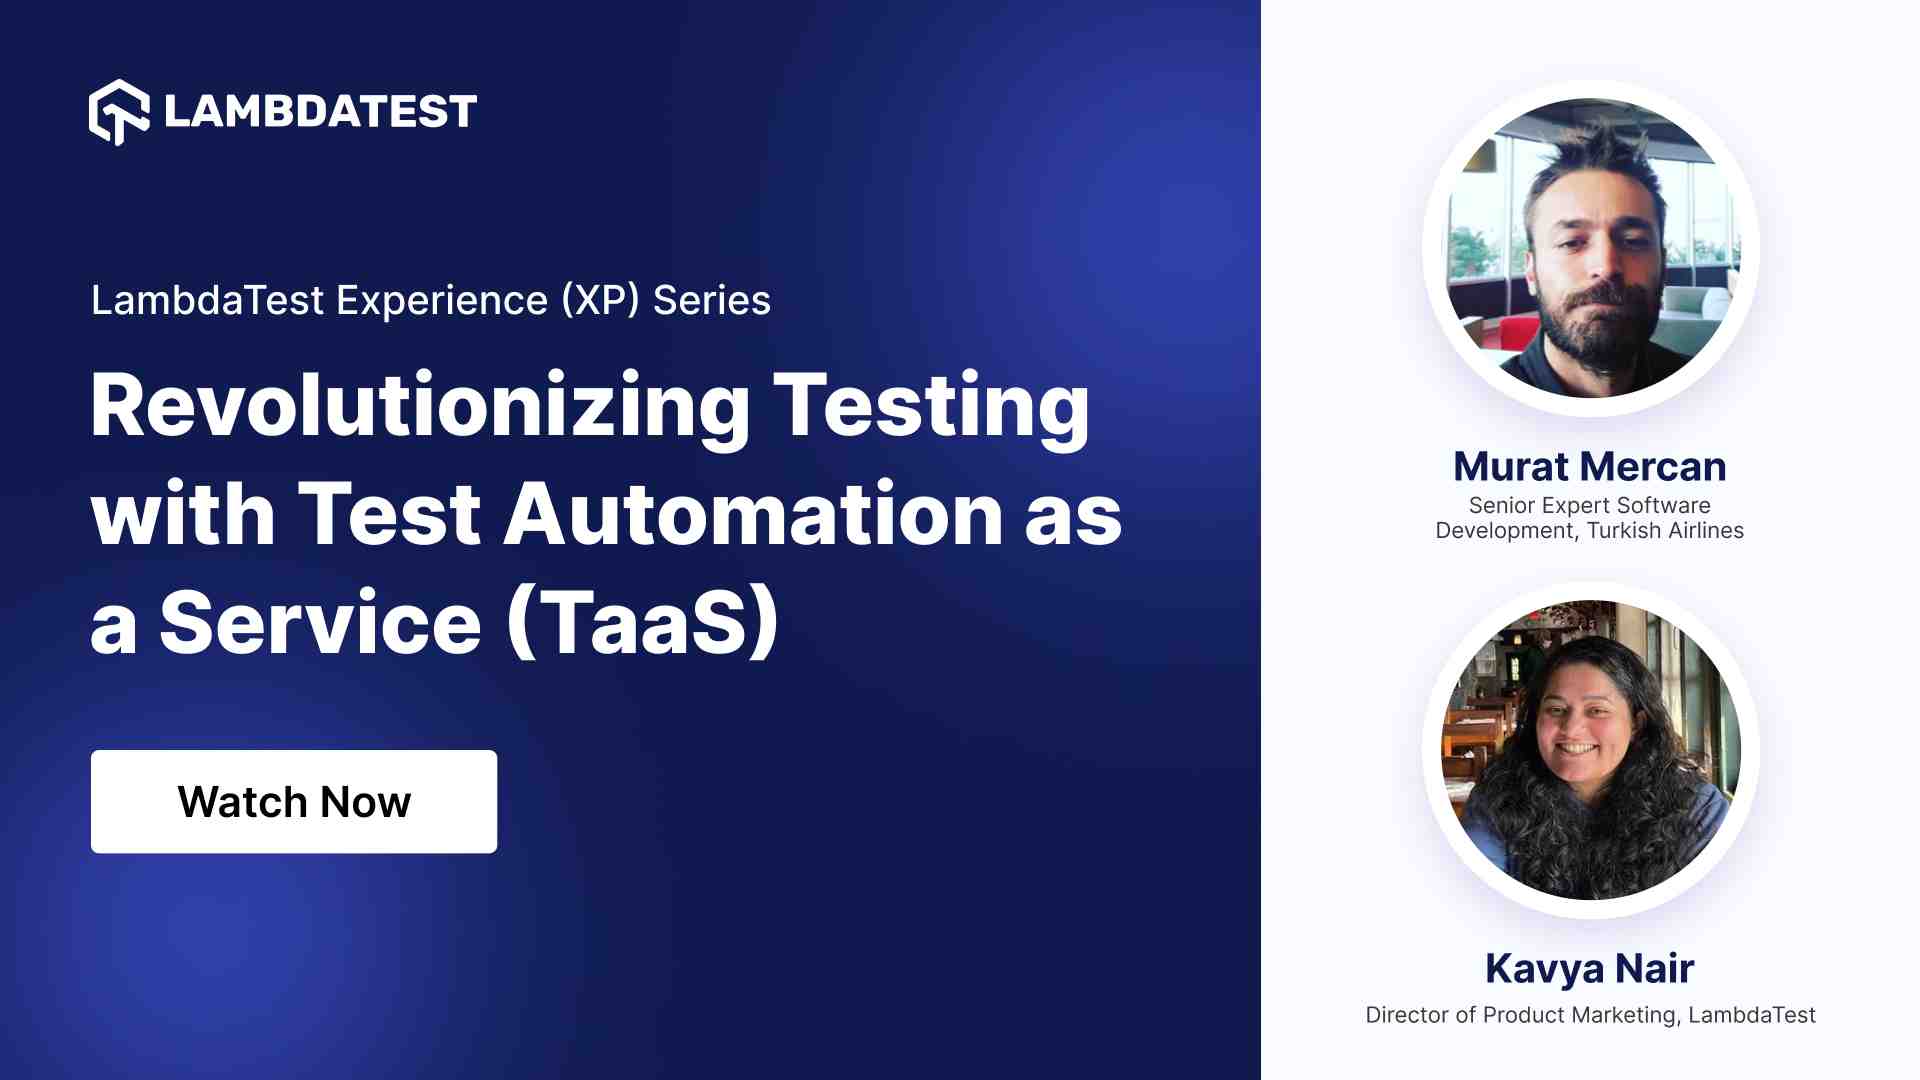 Revolutionizing Testing with Test Automation as a Service (TaaS)